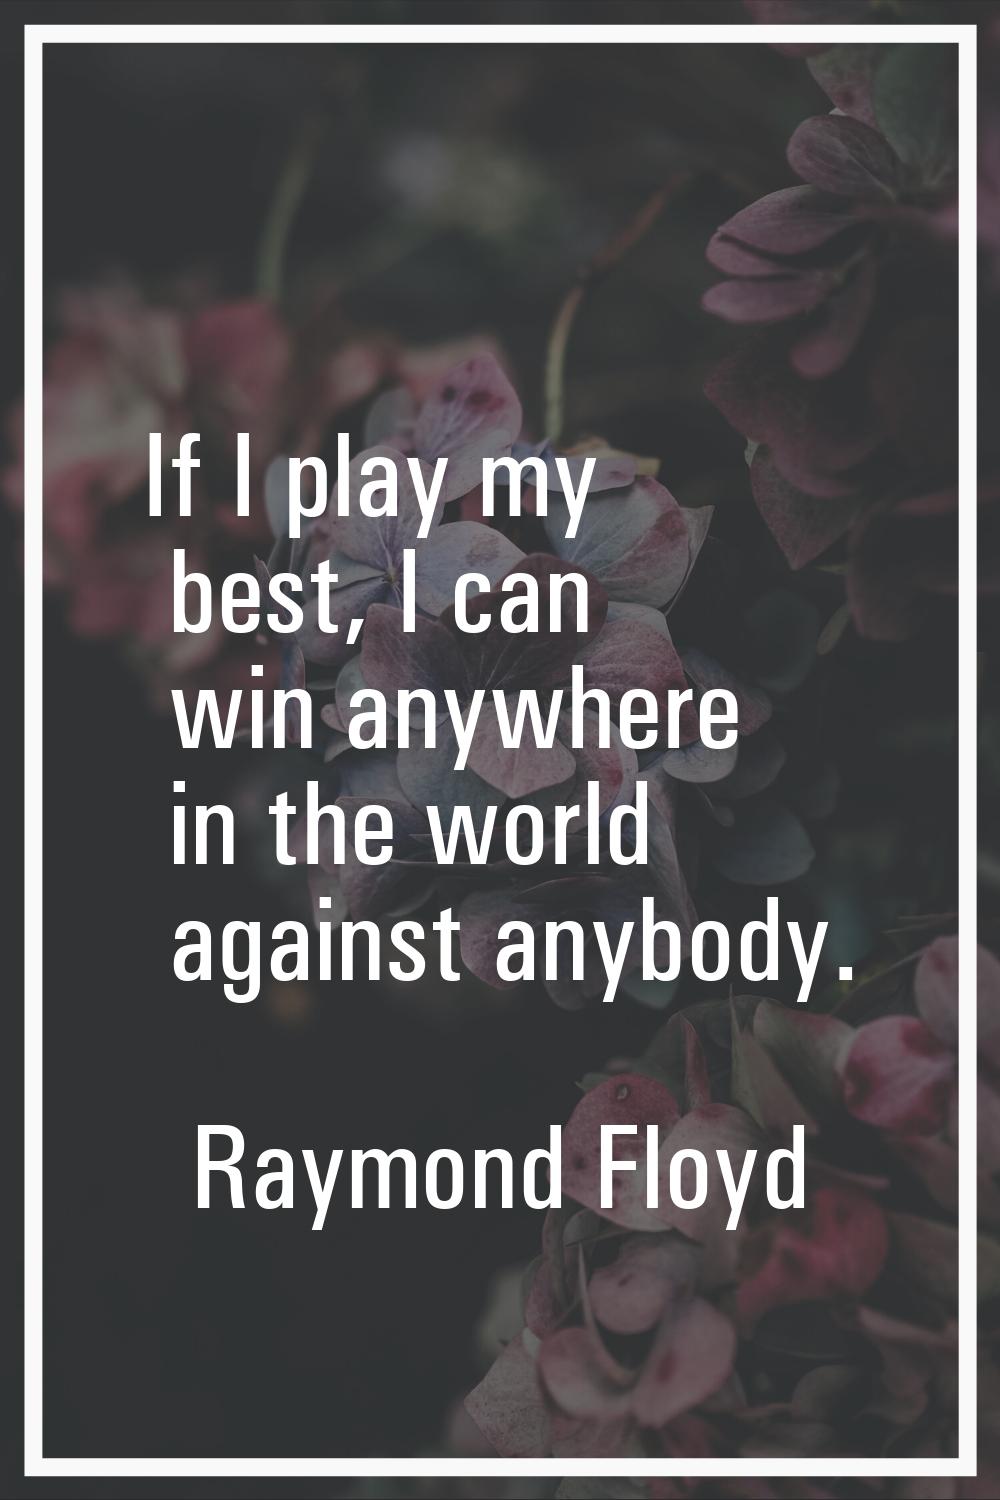 If I play my best, I can win anywhere in the world against anybody.